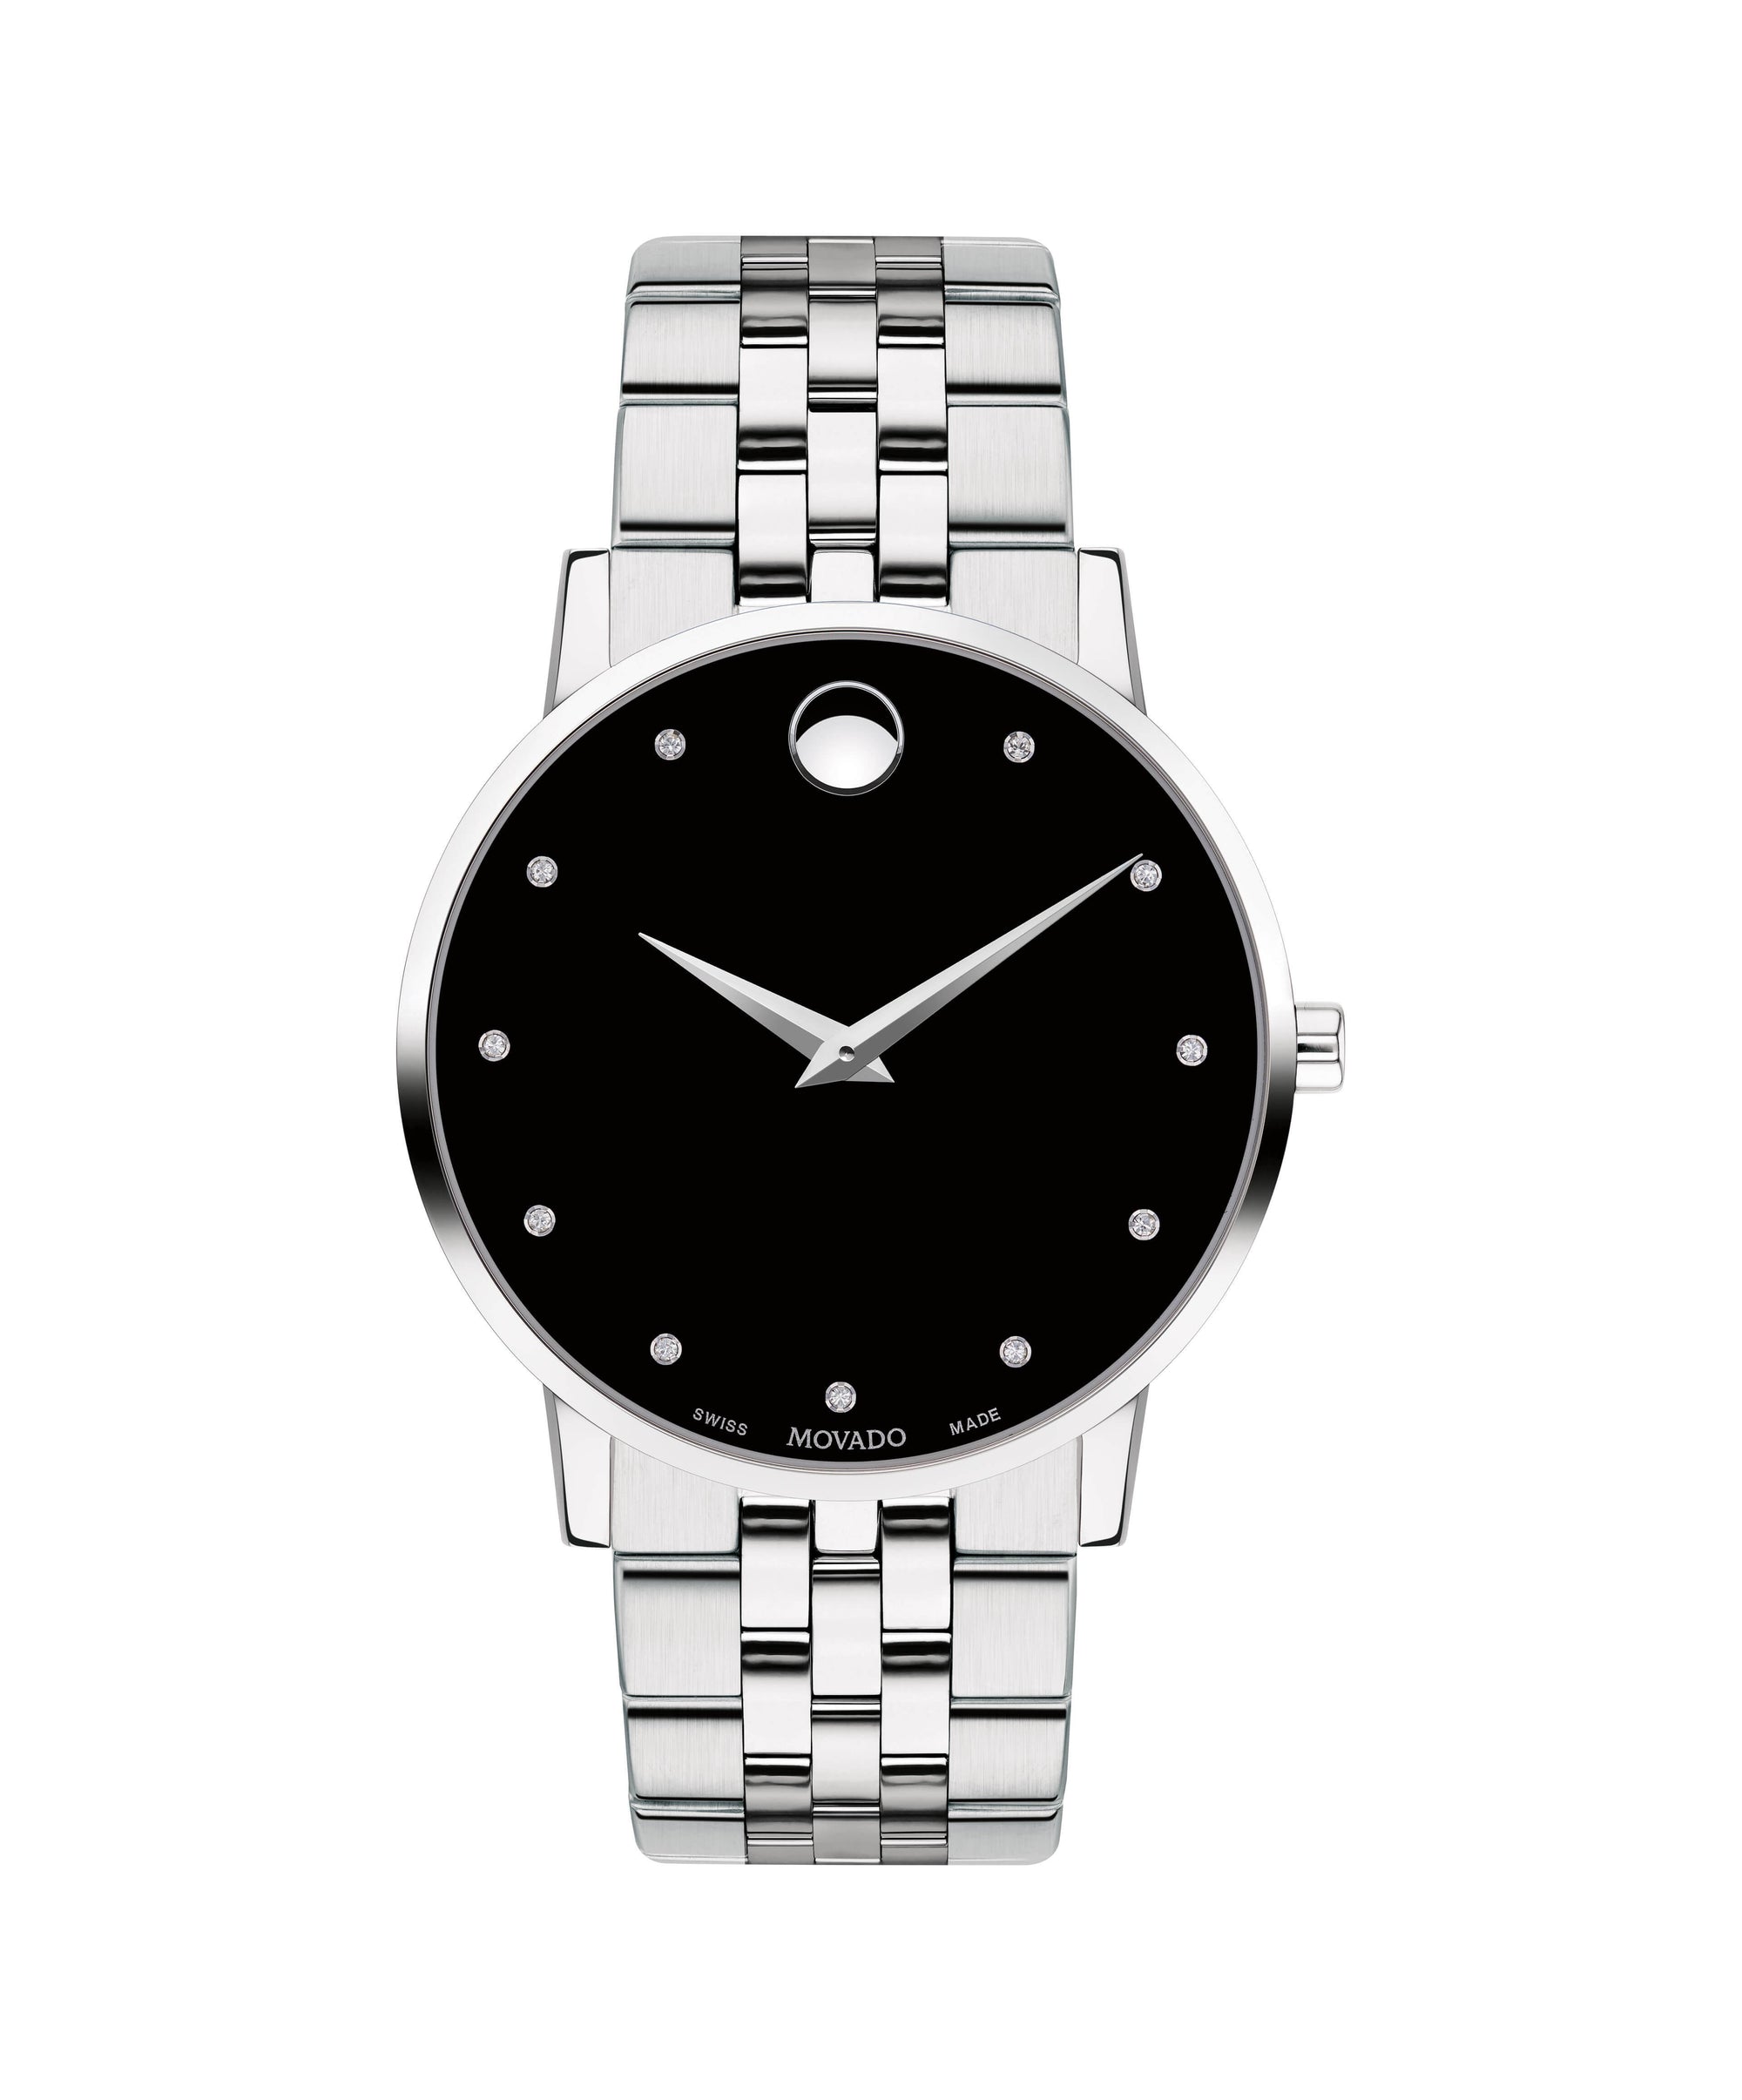 [Sehr berühmt] Movado Museum Classic Men\'s Automatic Obsessions - 0607567 Jewellery watch